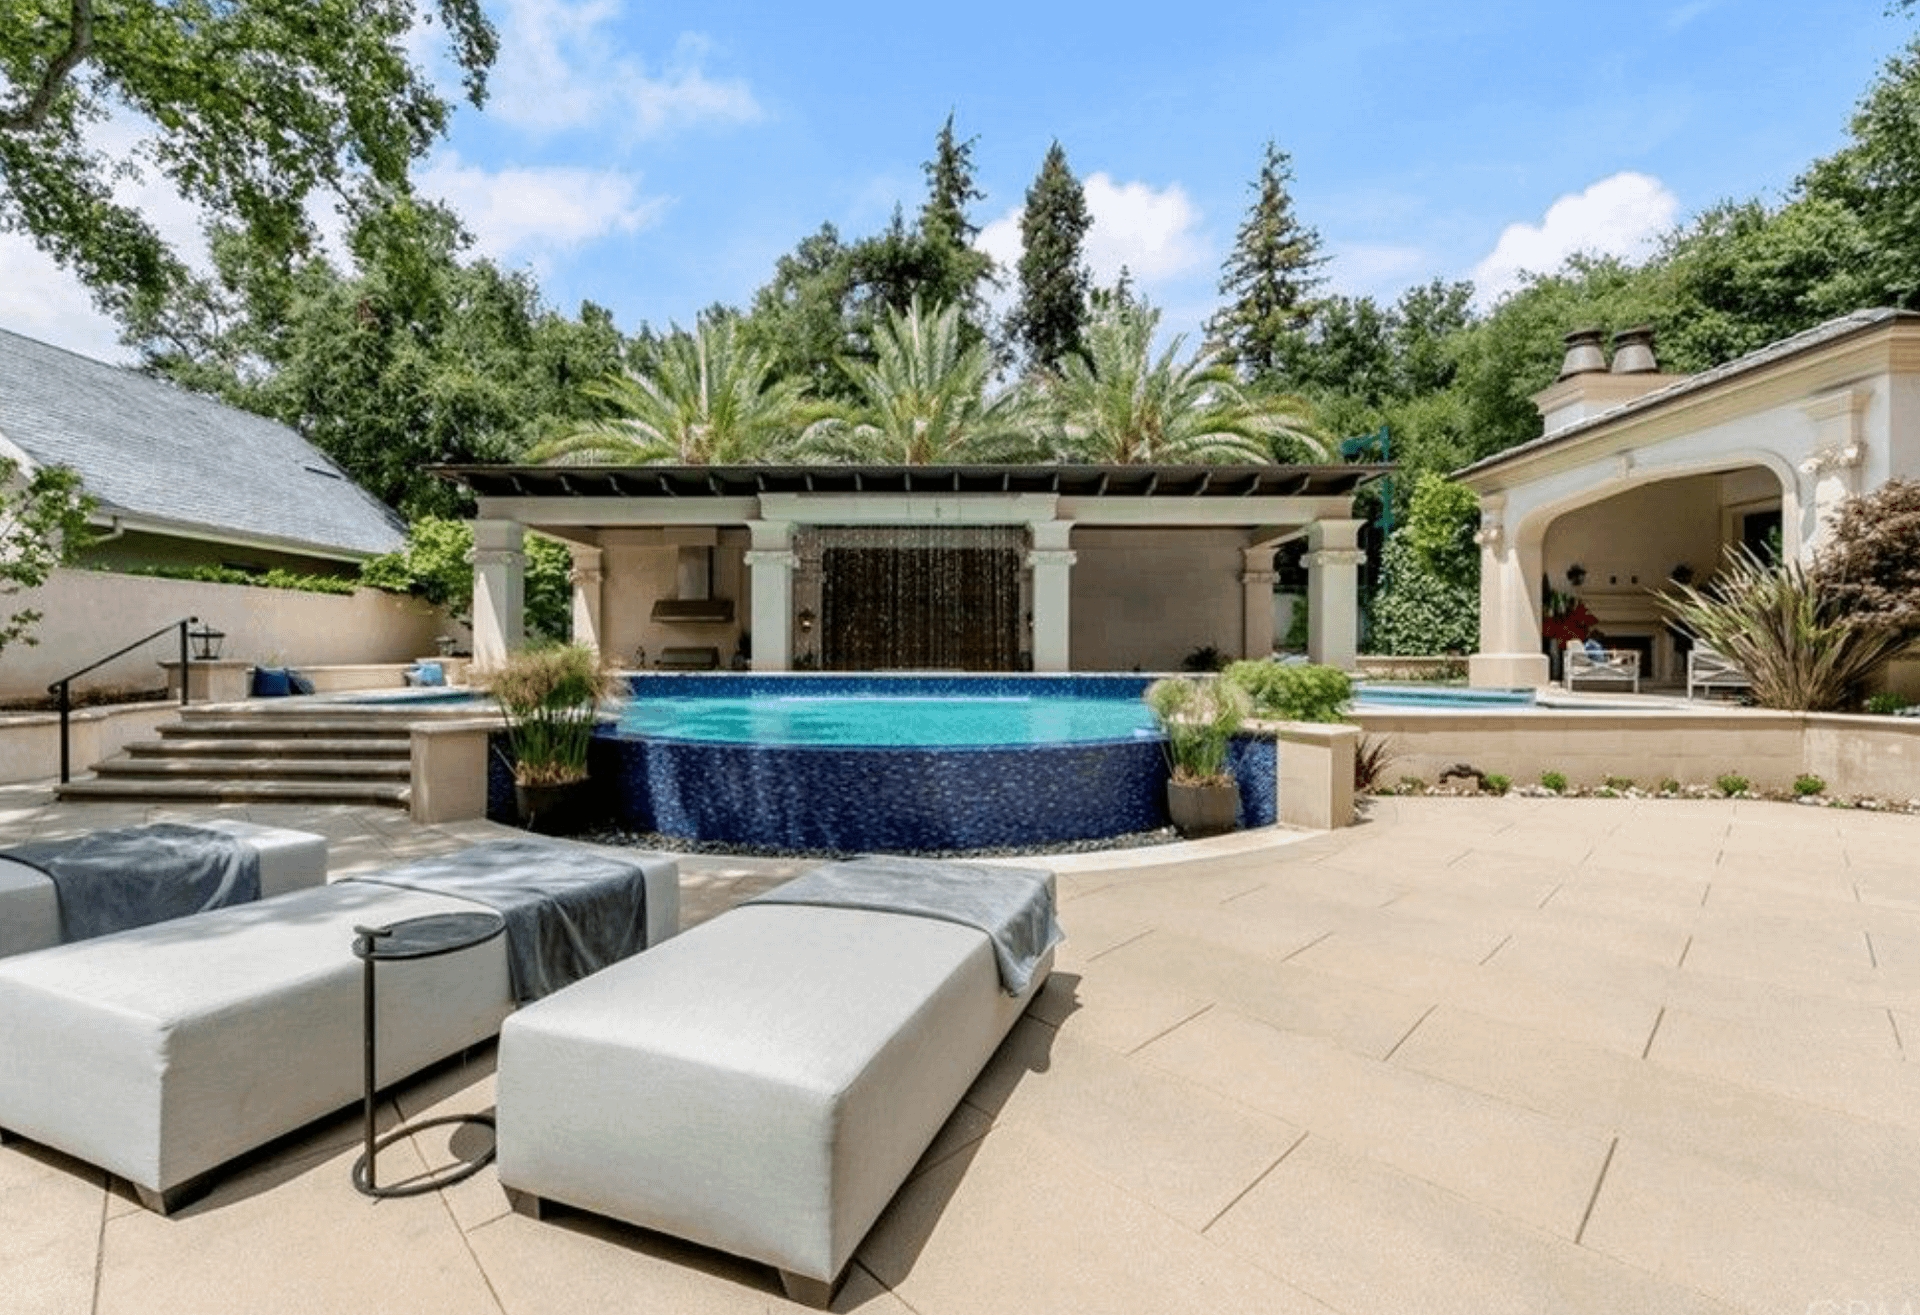 $11 Million French Style Home In Arcadia, California - Homes of the Rich